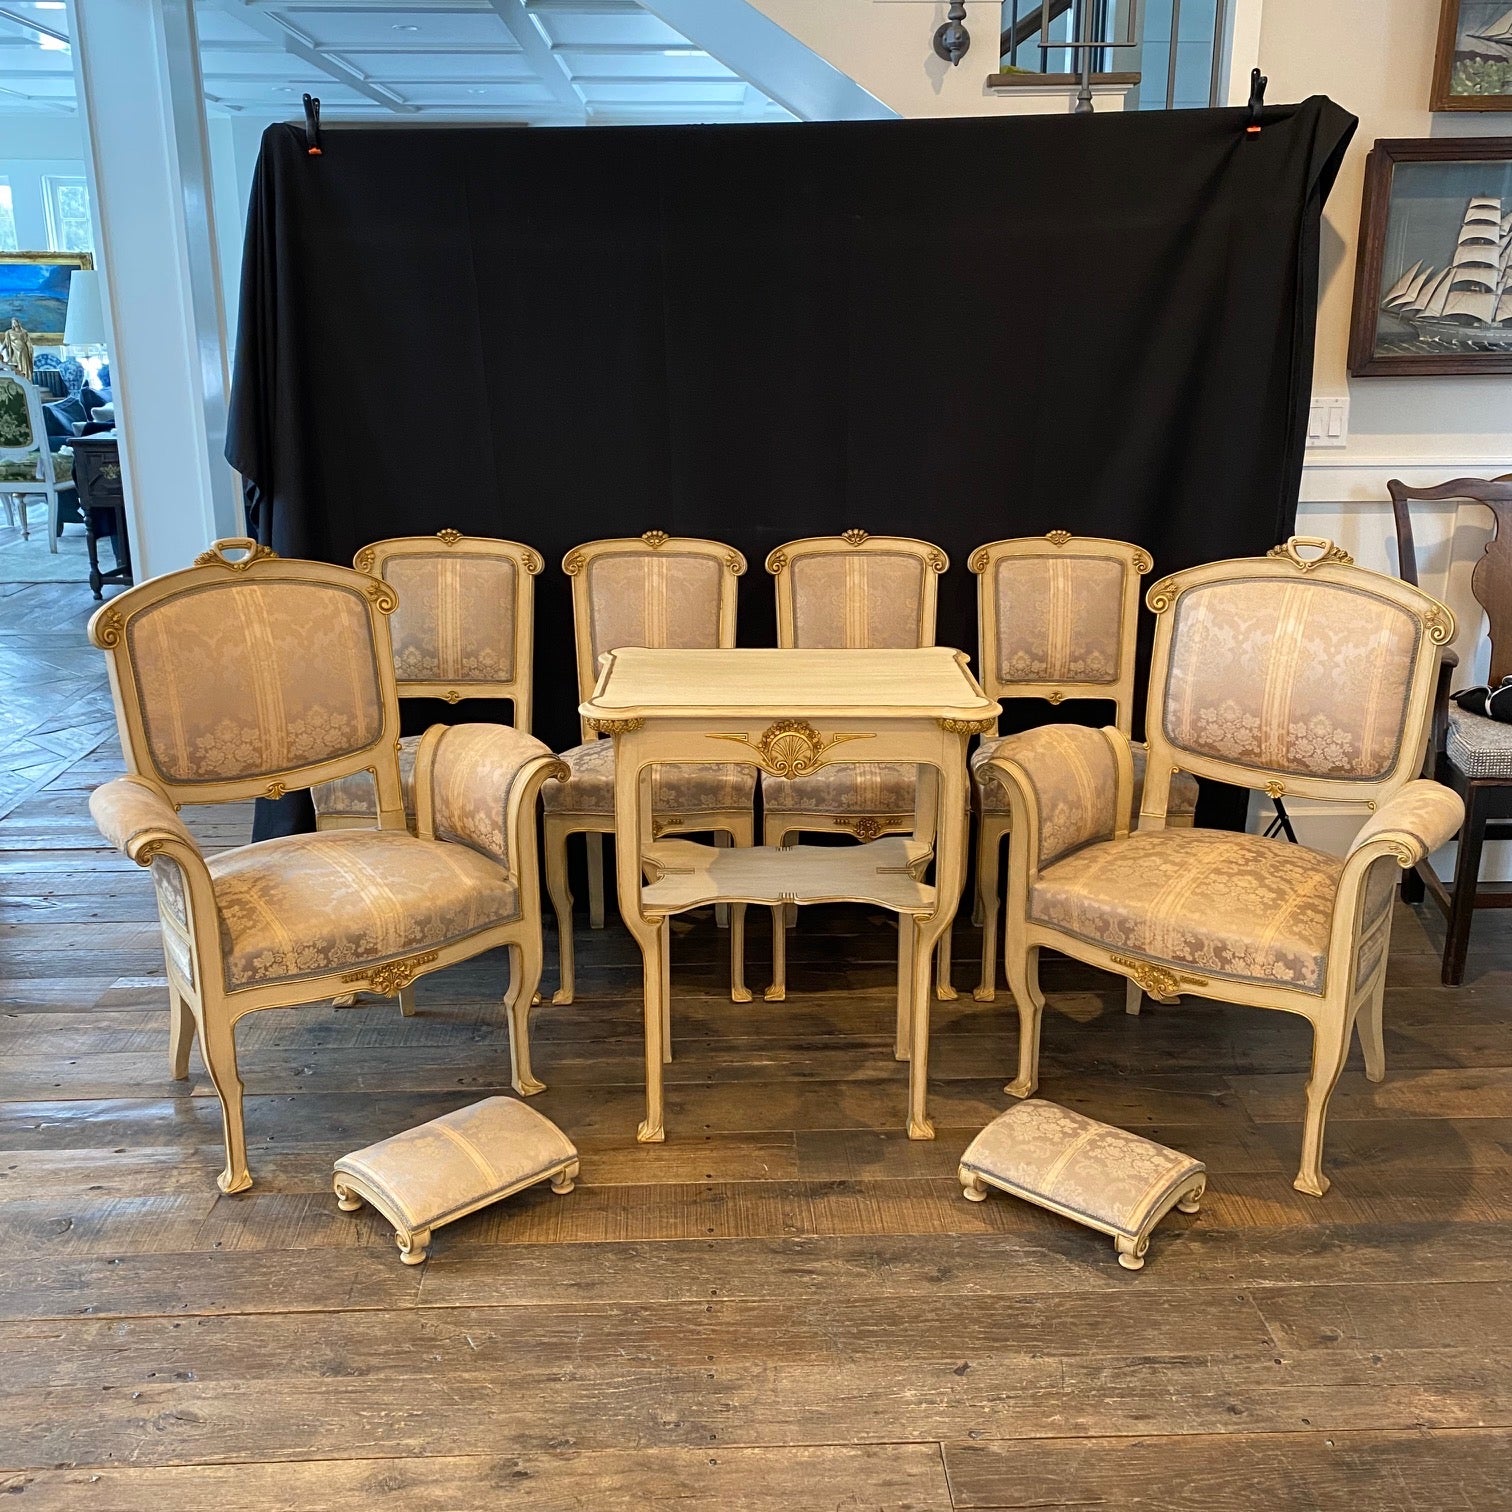 Excellent early 20th century Art Nouveau complete original salon suite set, hand carved and painted in a lovely neutral color with original silk upholstery in very good condition of the highest quality. The name 